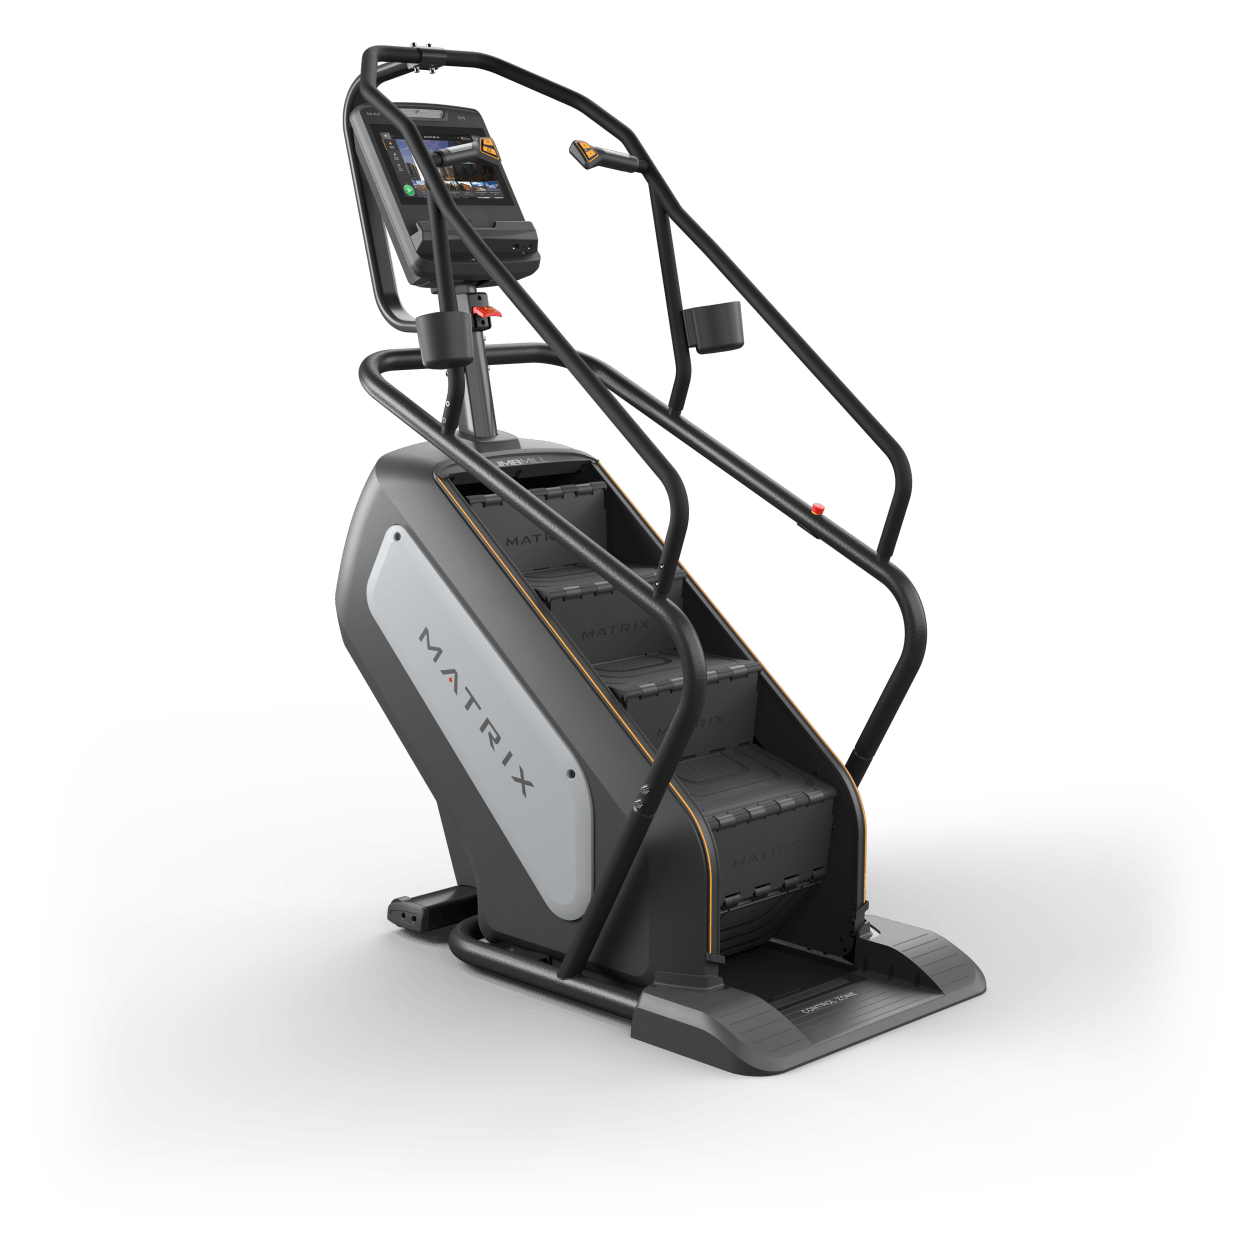 Matrix Fitness Performance Climbmill with Touch Console full view | Fitness Experience